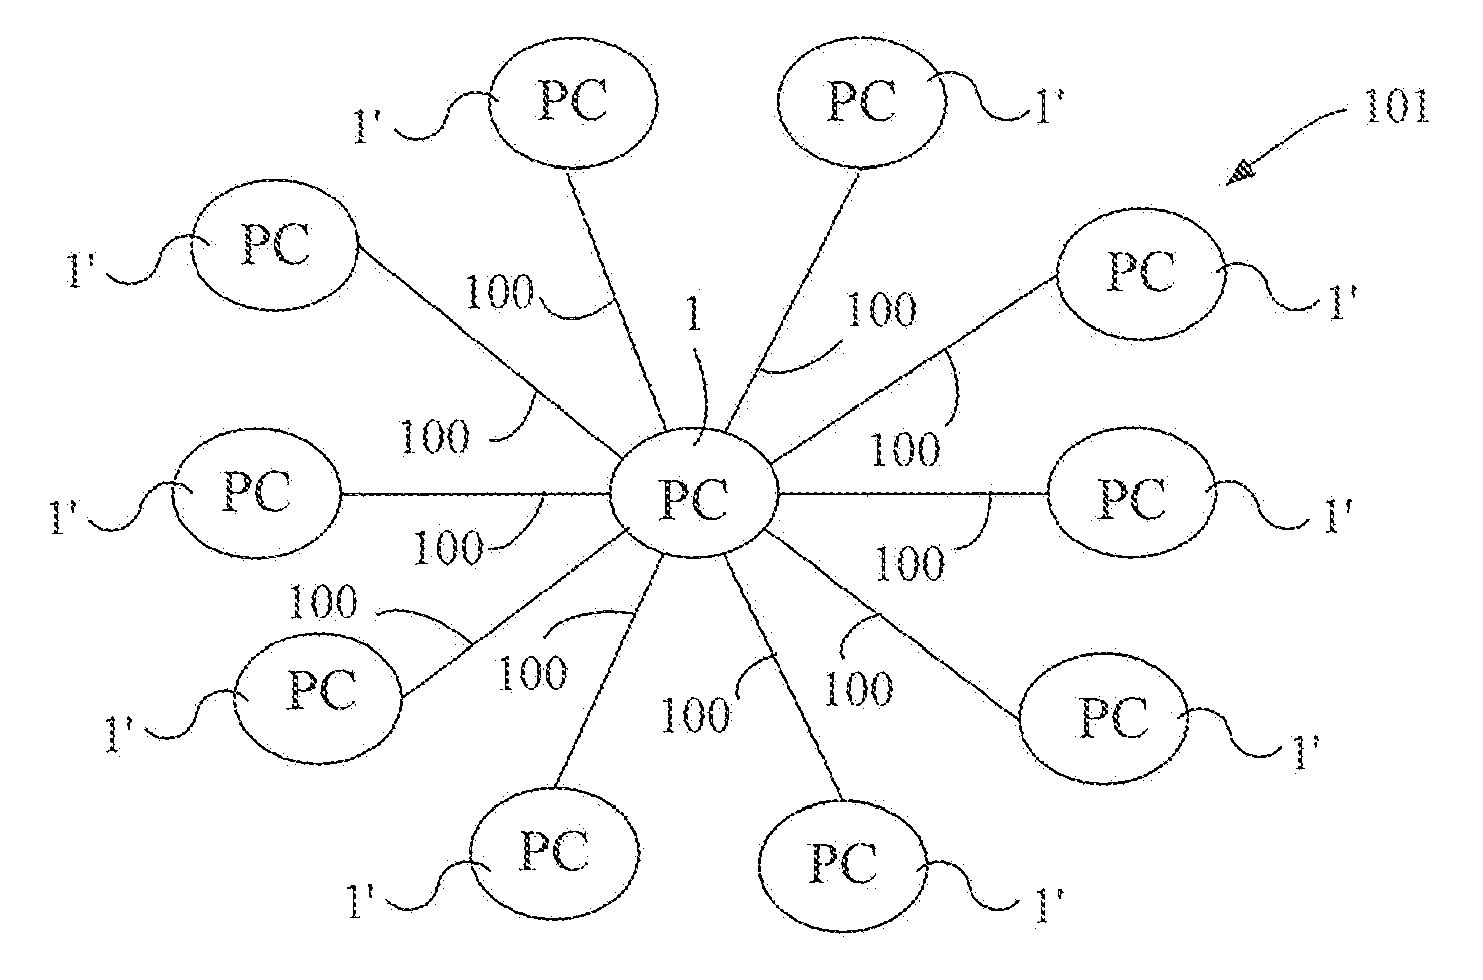 Global network computers for shared processing